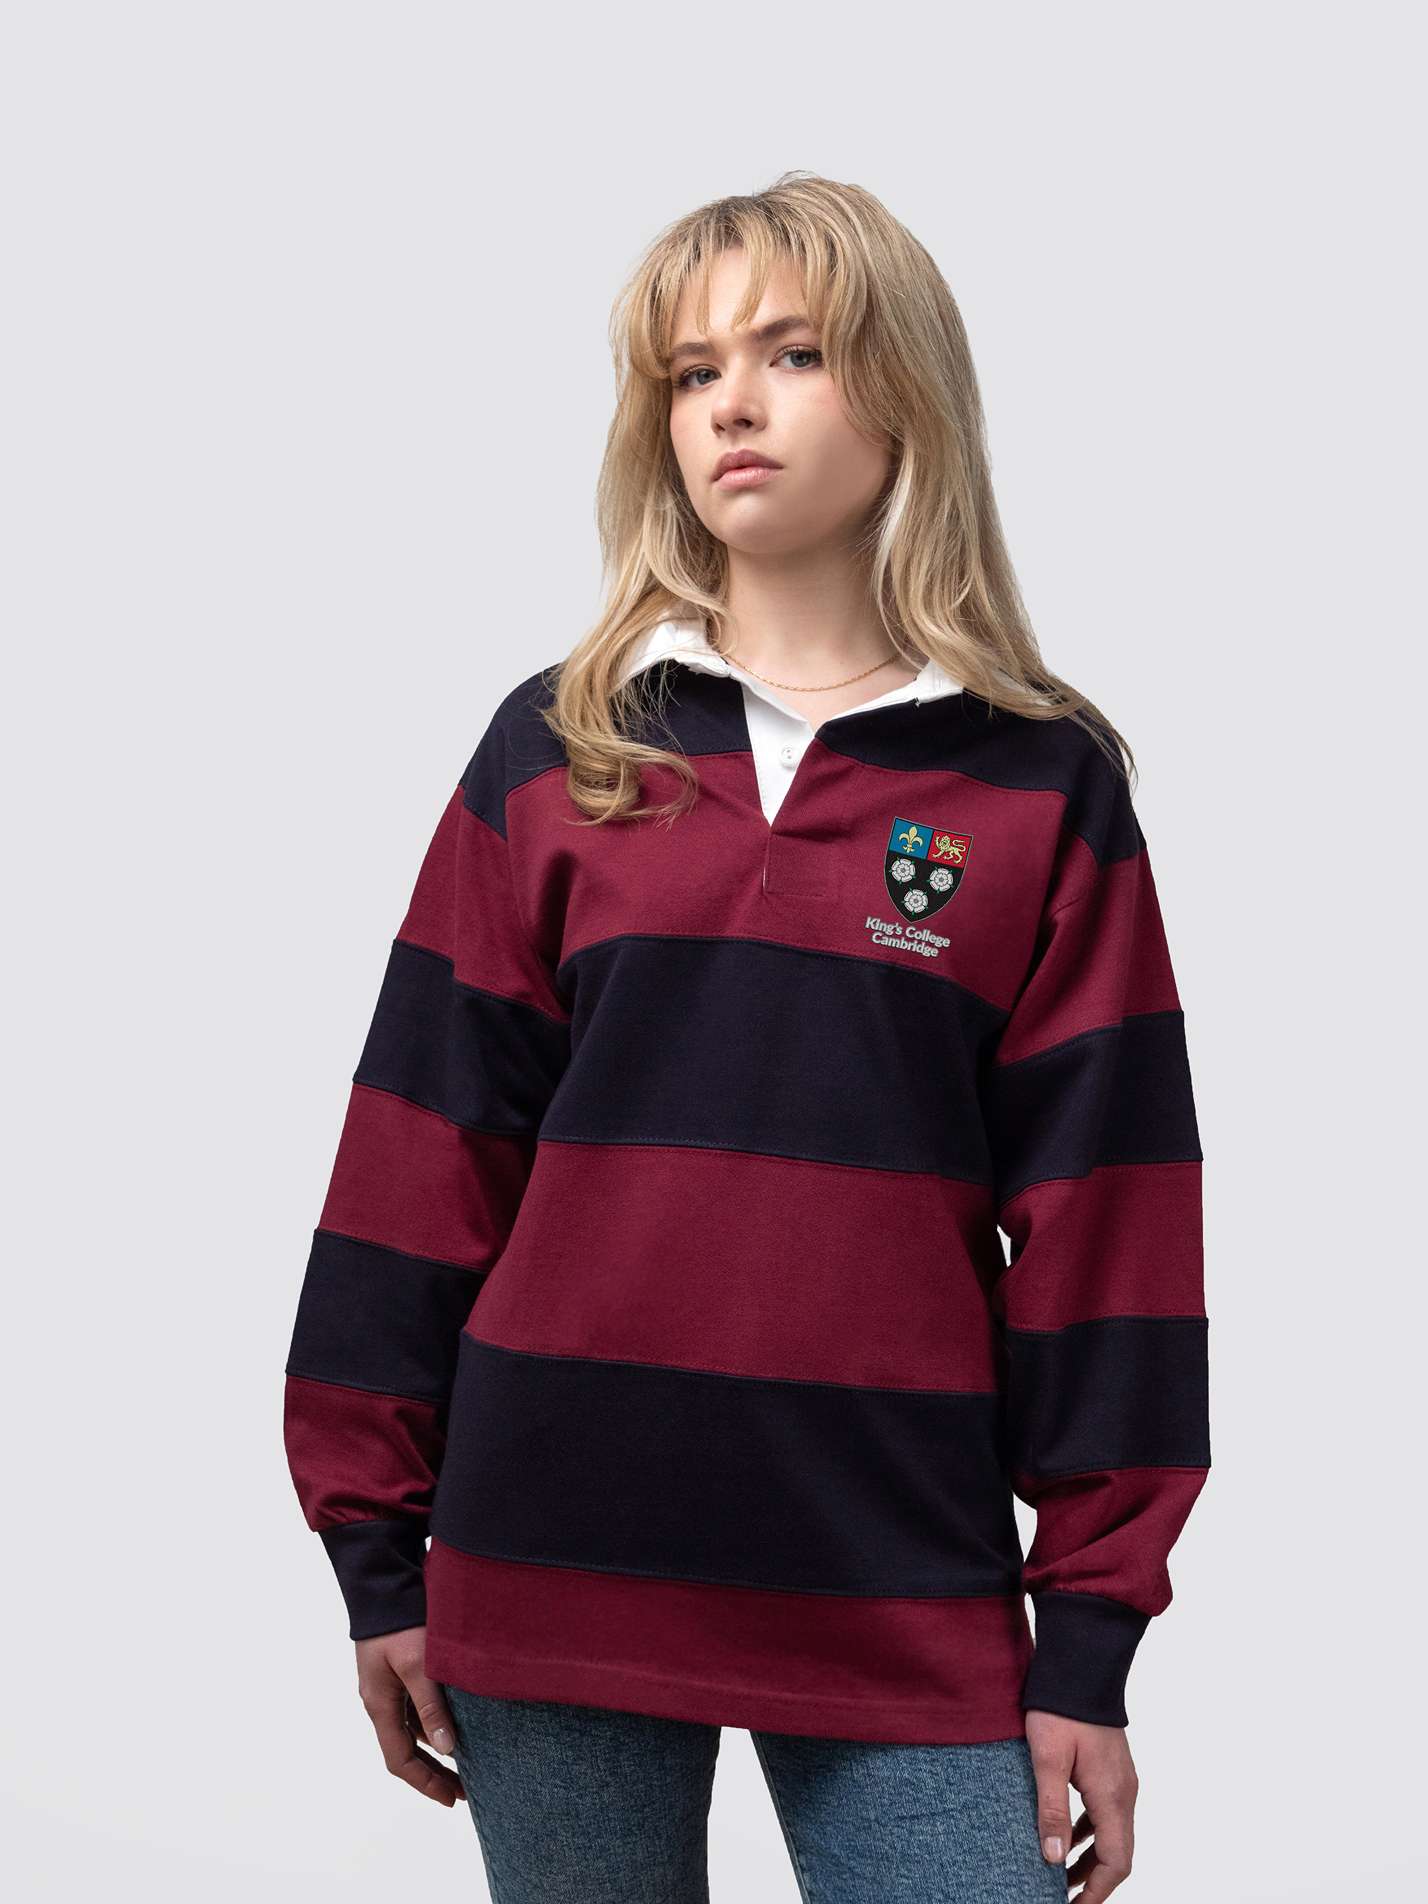 King's College rugby shirt, with burgundy and navy stripes